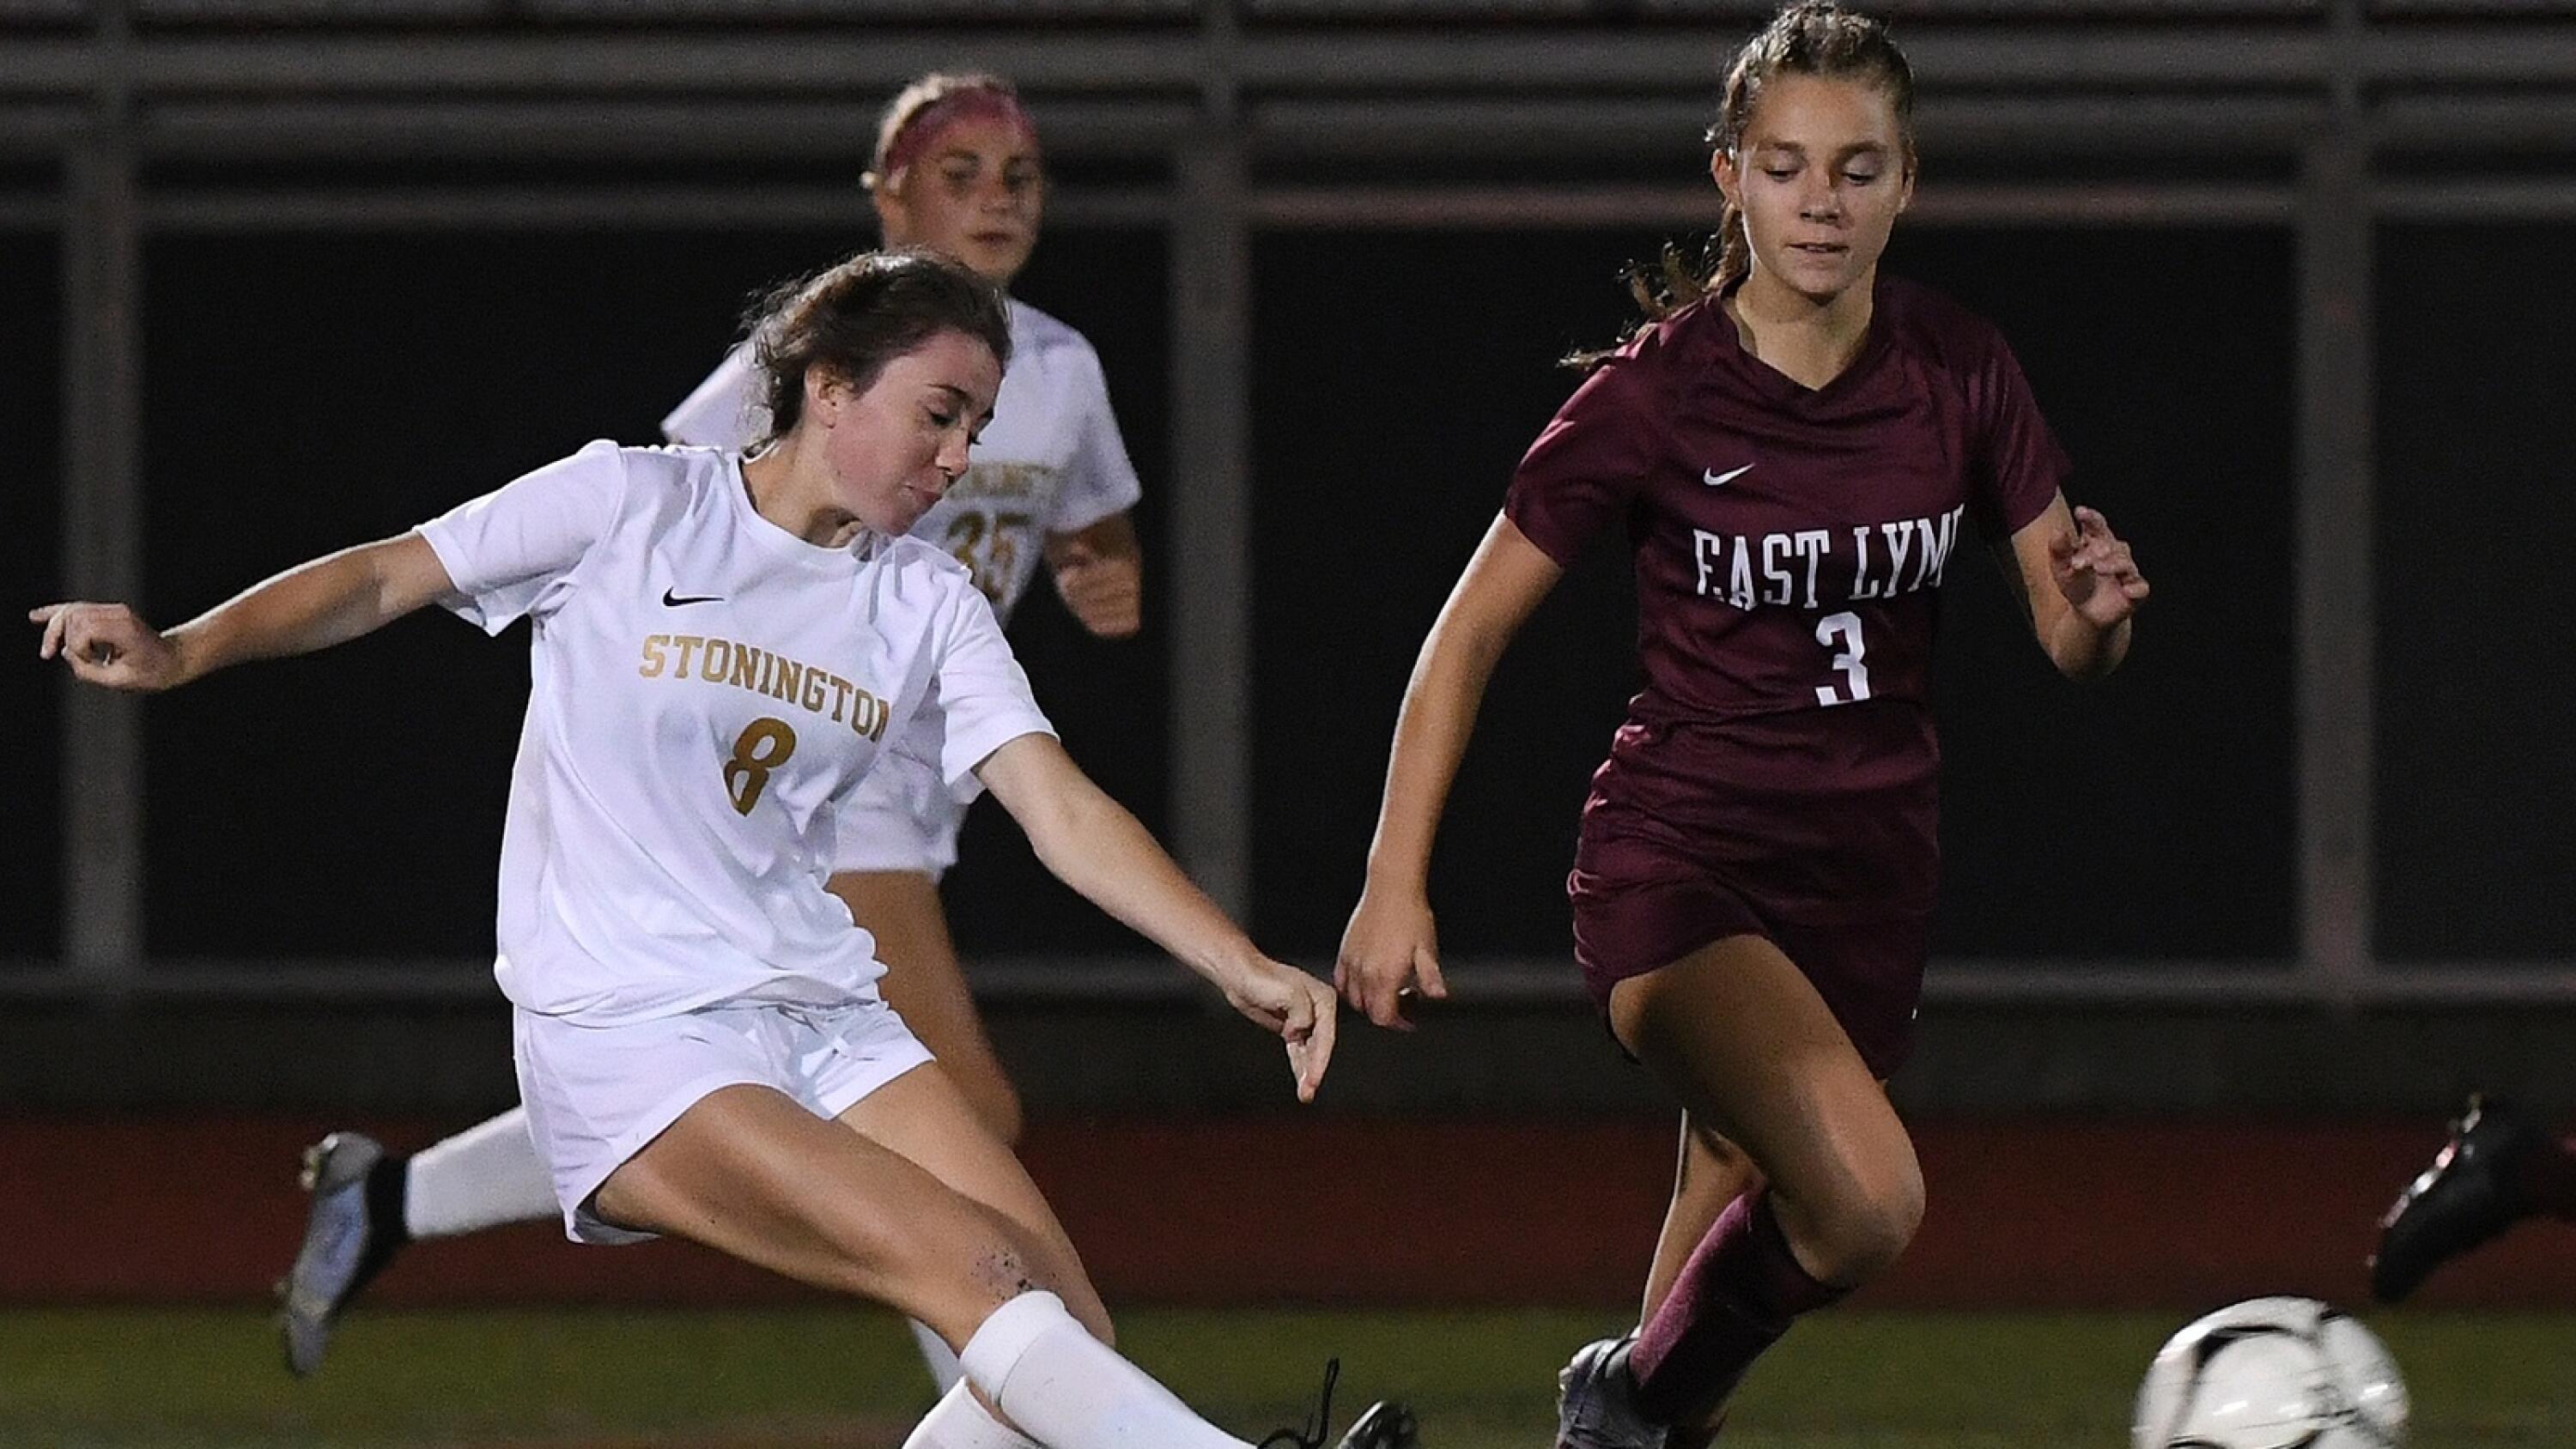 Local roundup: Stonington girls edge East Lyme with late goal